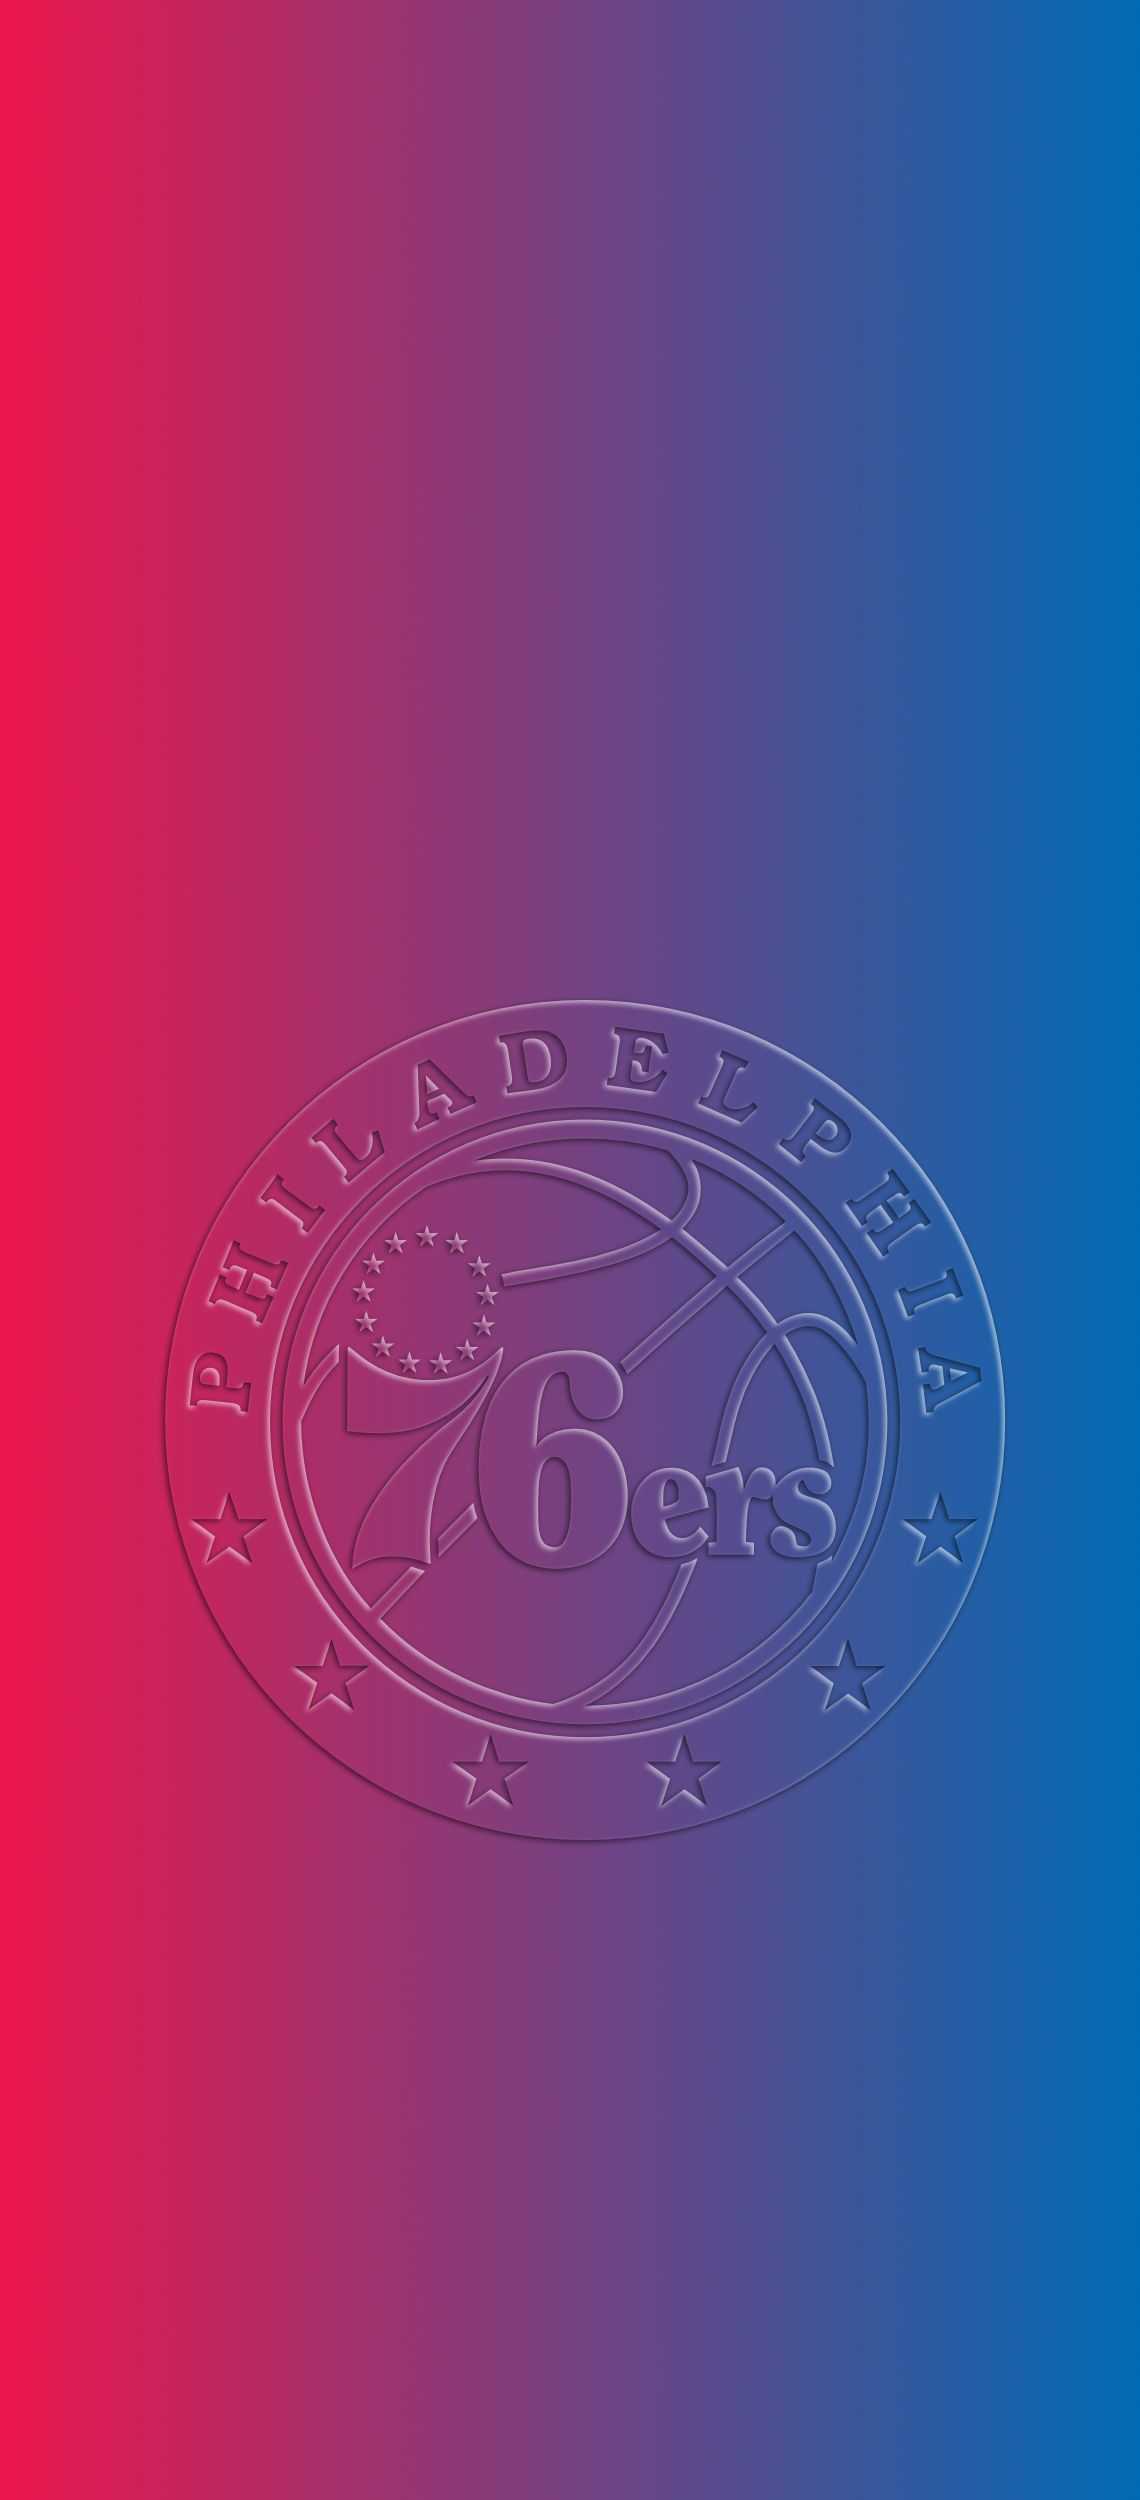 Sixers Wallpaper Android